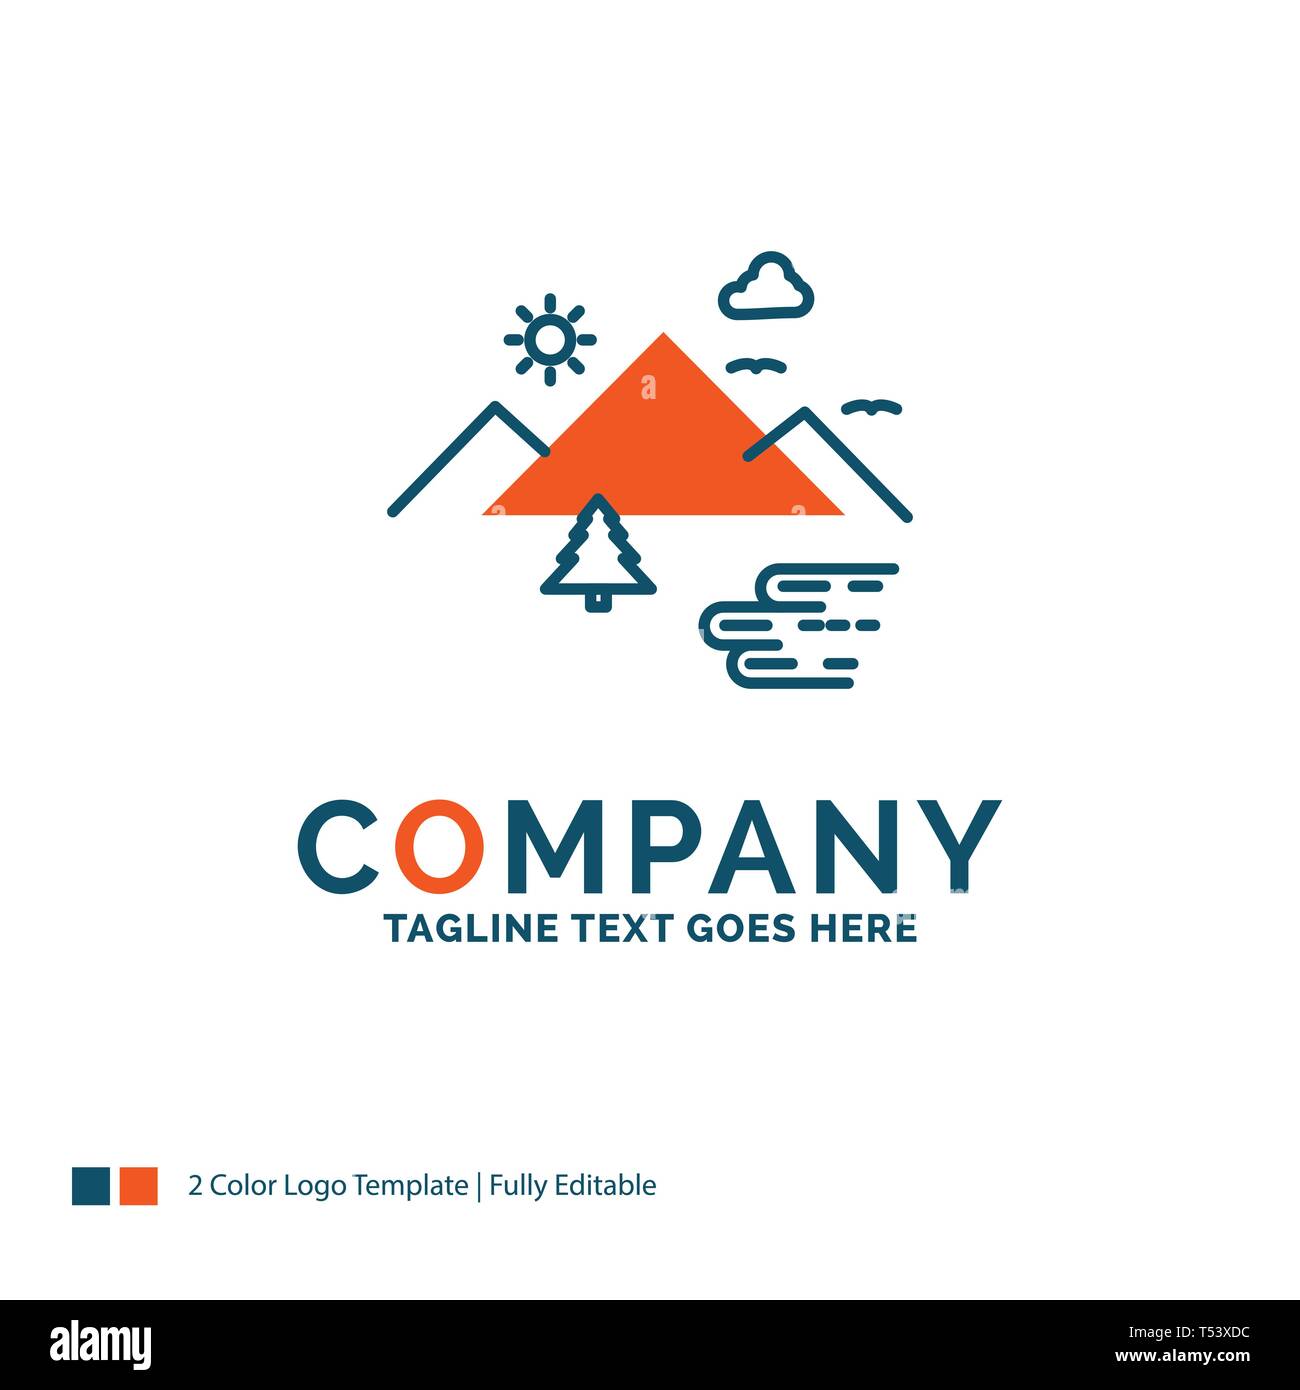 Mountains, Nature, Outdoor, Clouds, Sun Logo Design. Blue and Orange Brand Name Design. Place for Tagline. Business Logo template. Stock Vector